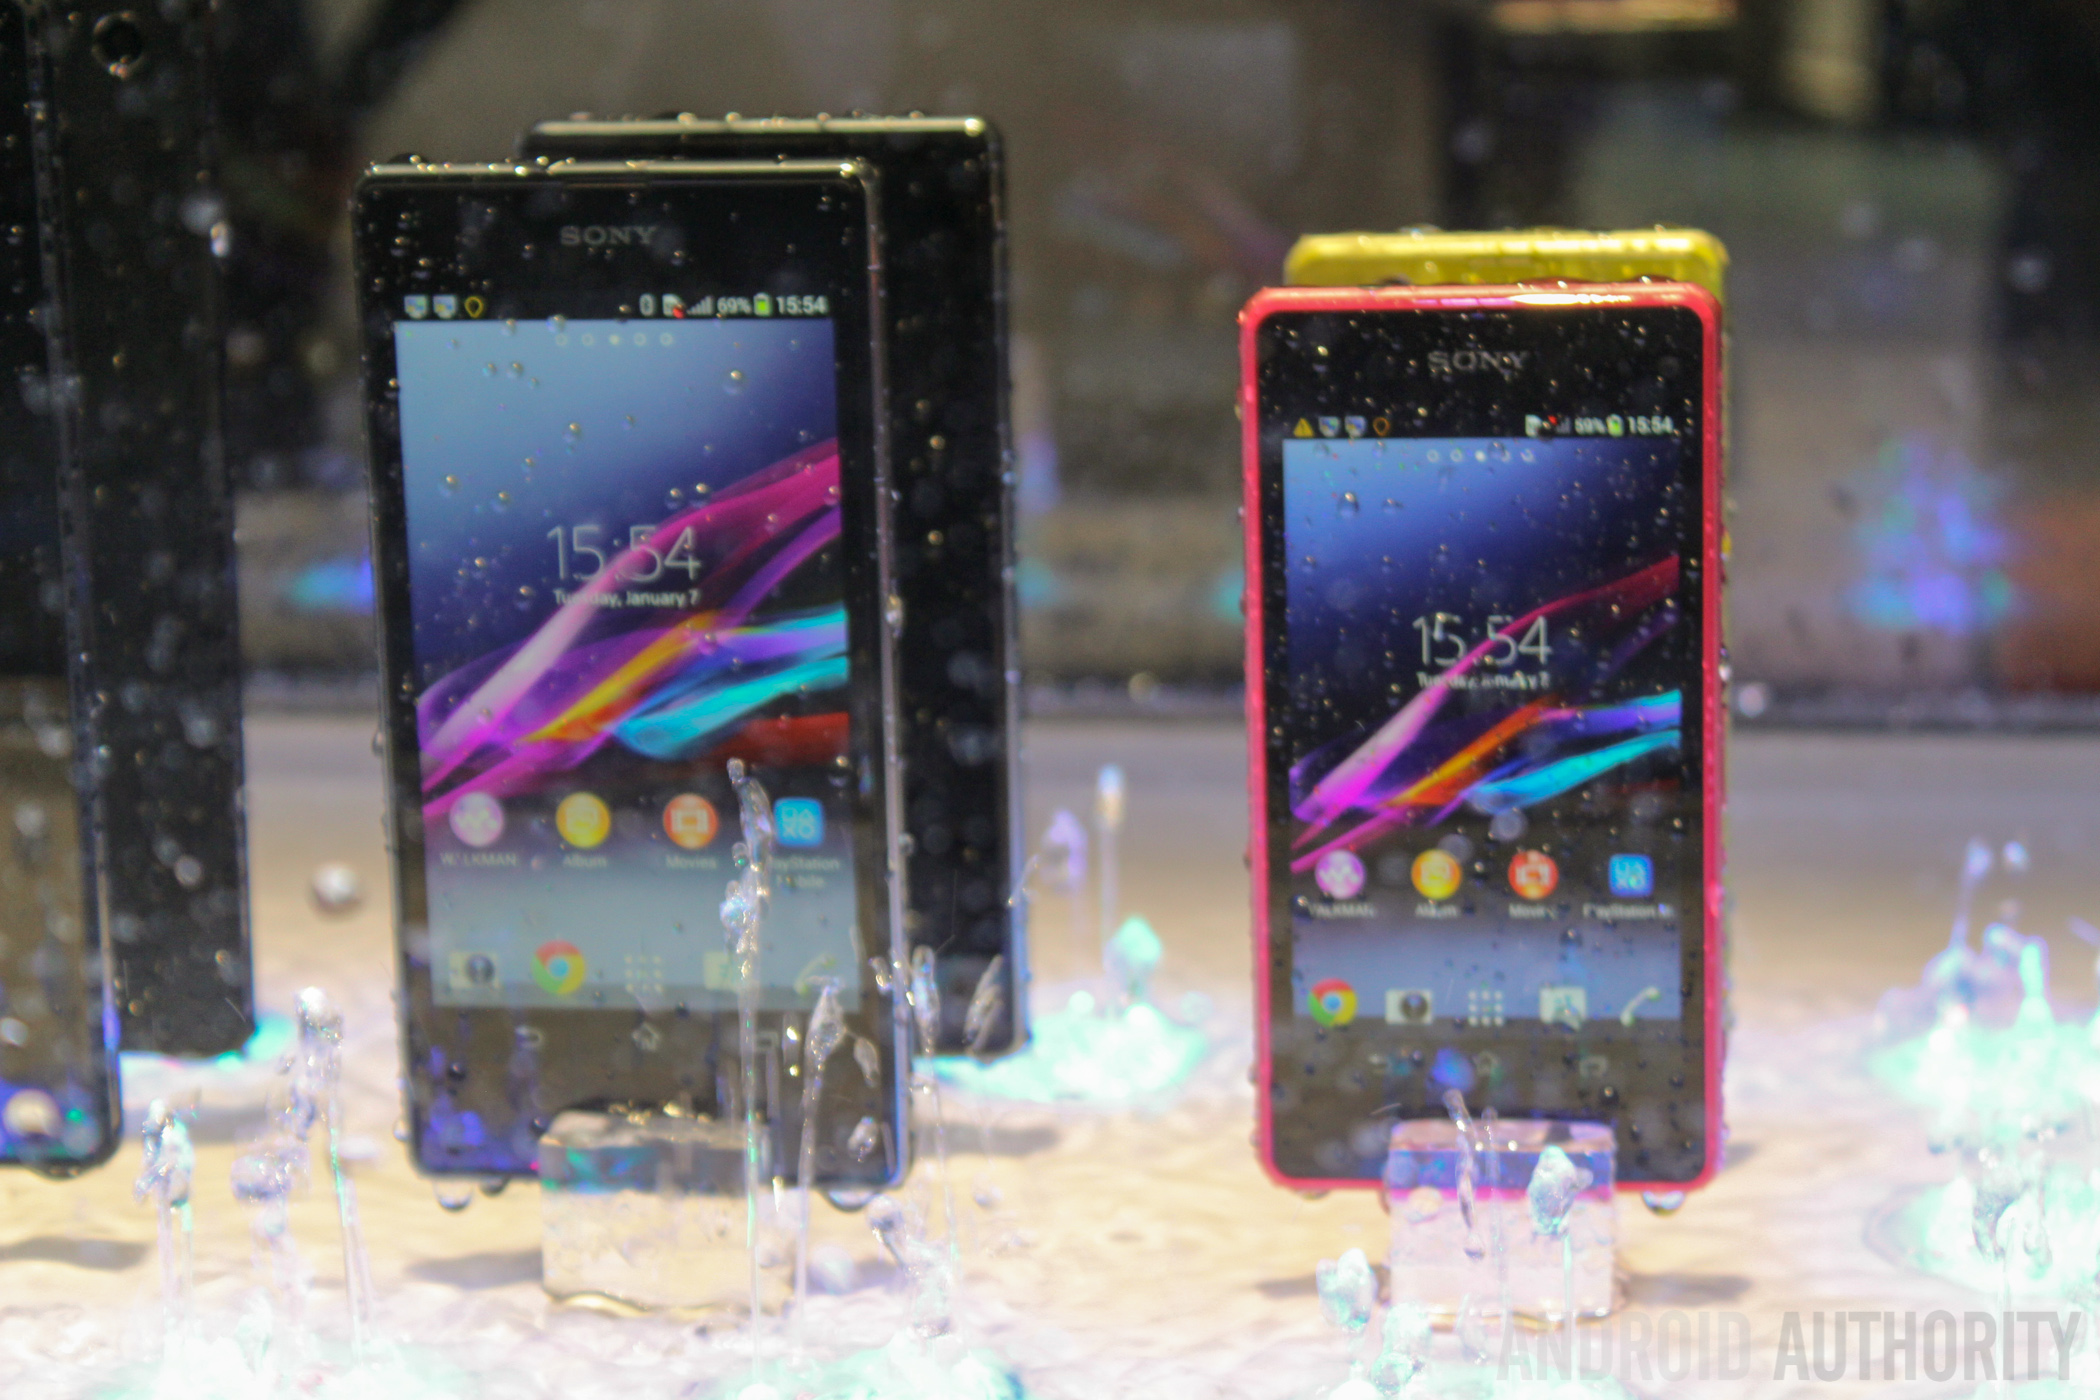 Sony-Xperia-Z1-Compact-Waterproof-CES-2014-4